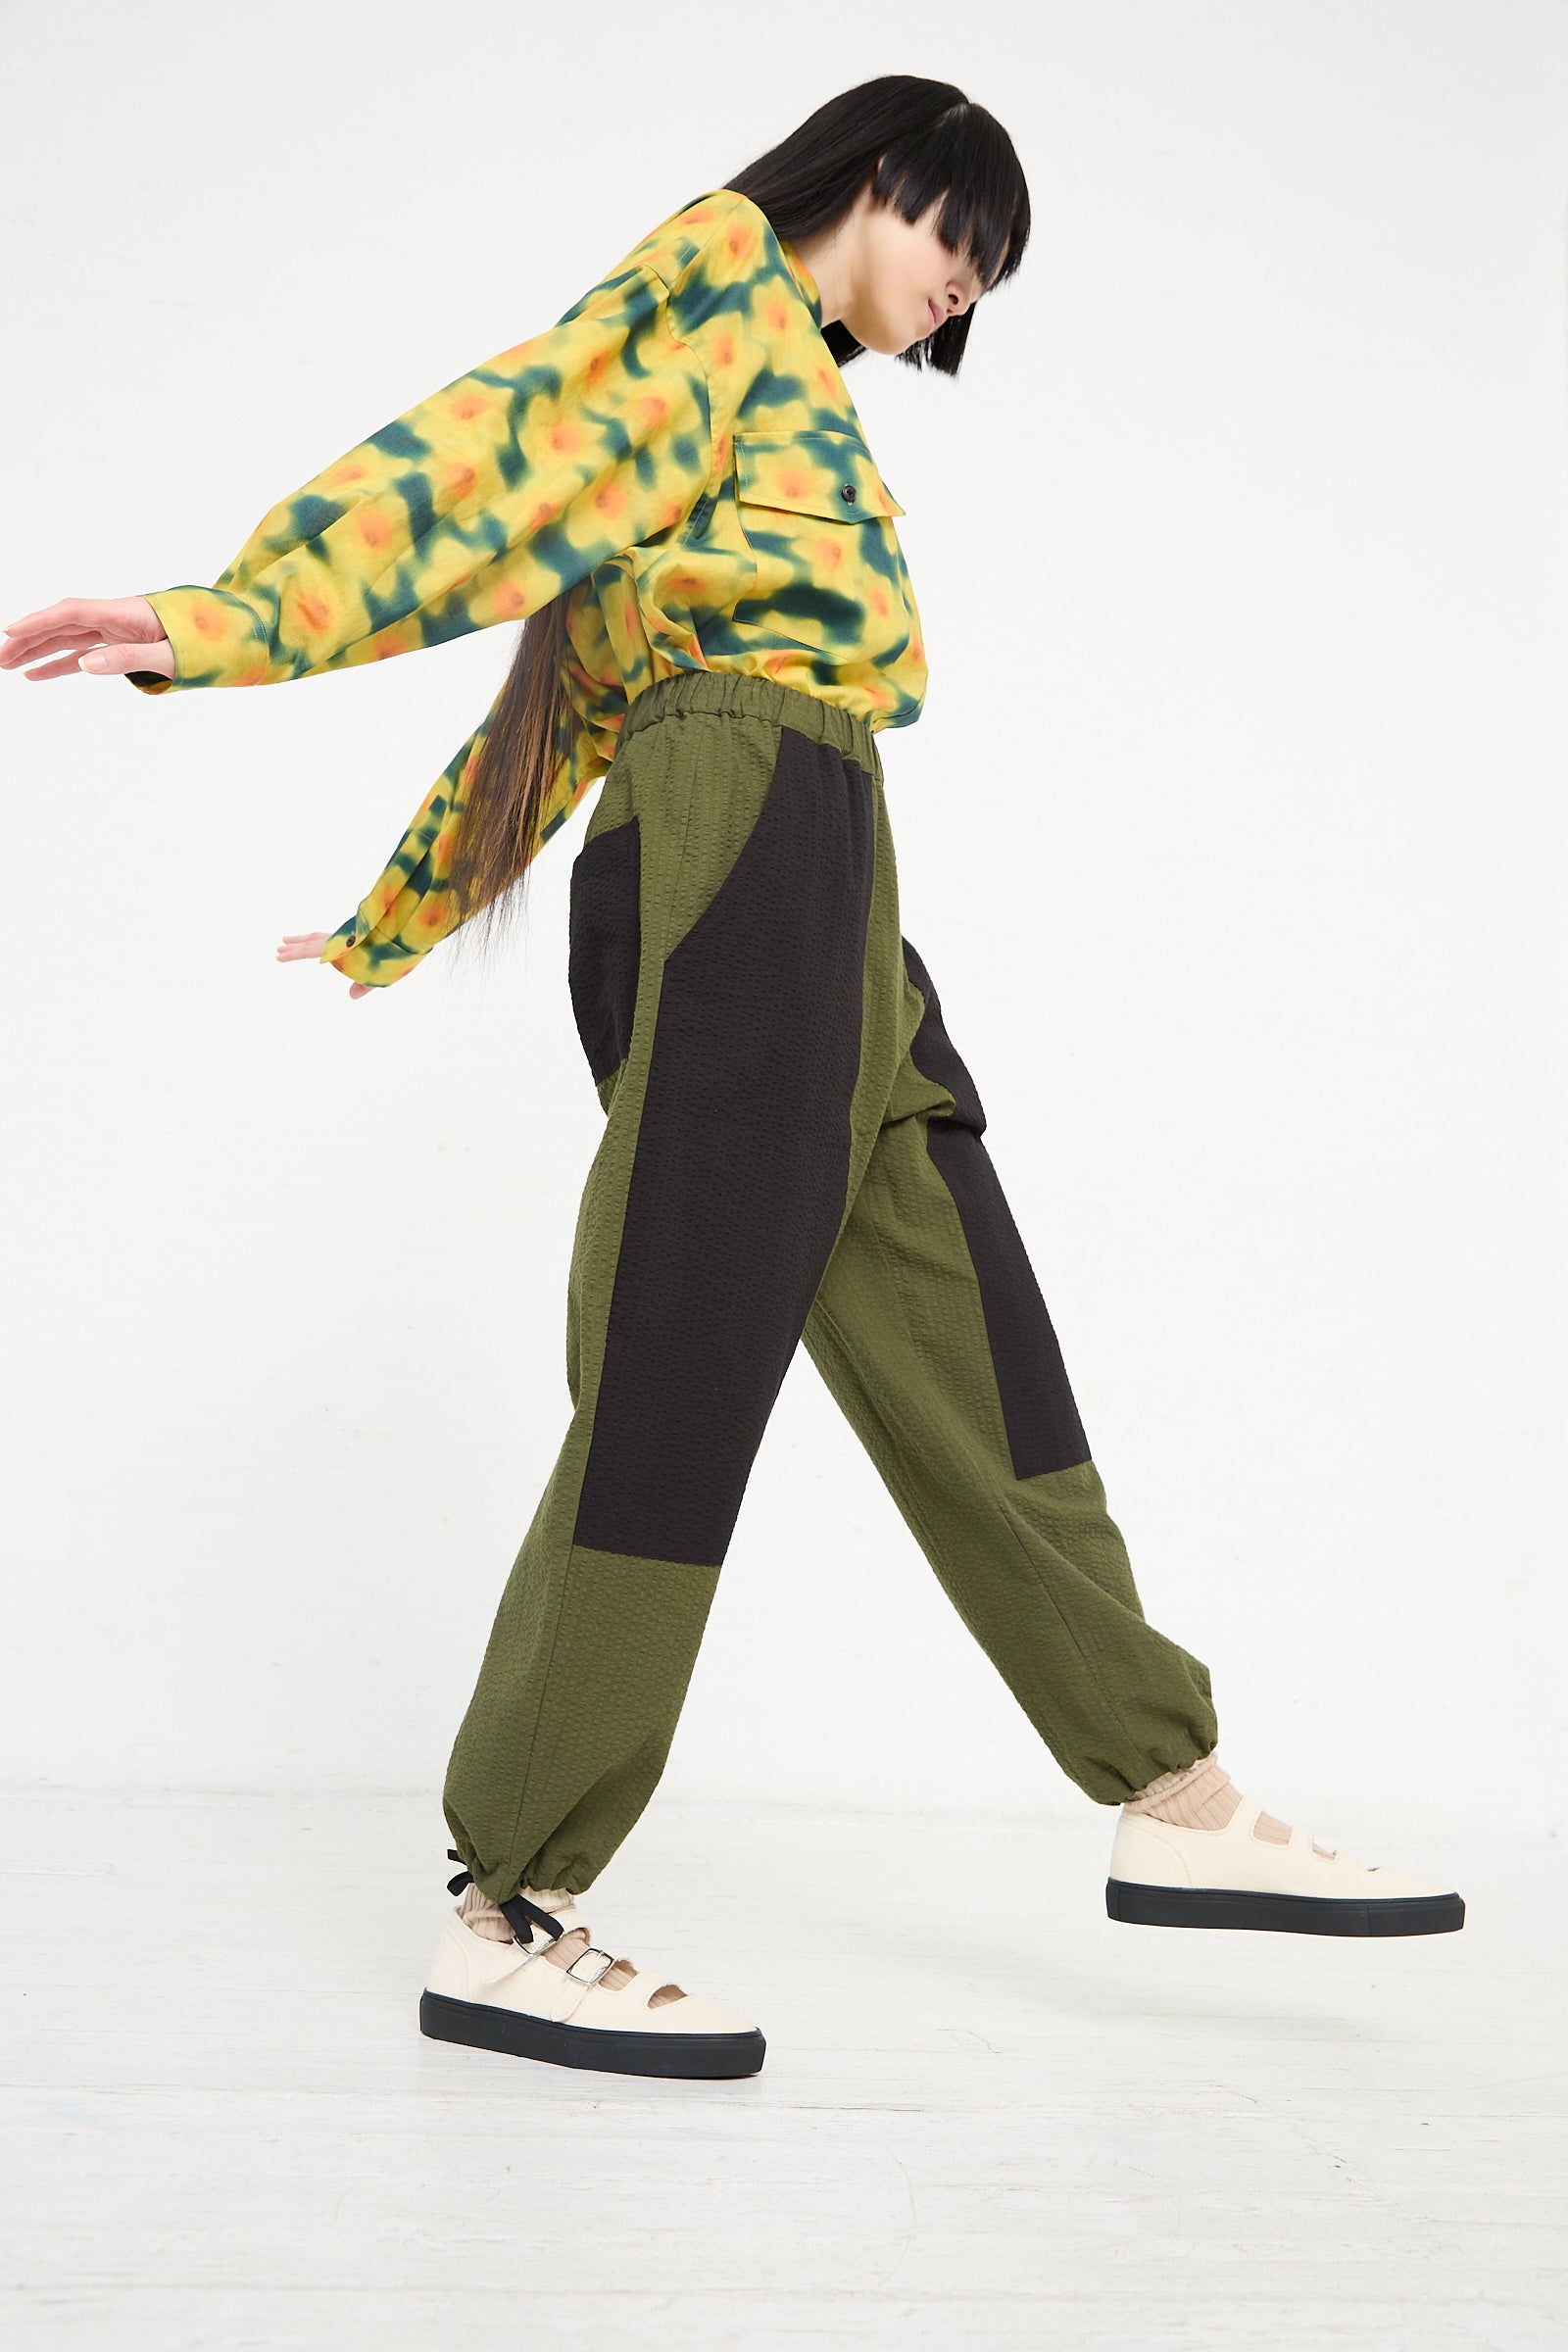 Woman in colorful top and relaxed fit KasMaria Cotton Seersucker Work Pant in Combo Color posing mid-step against a white background.